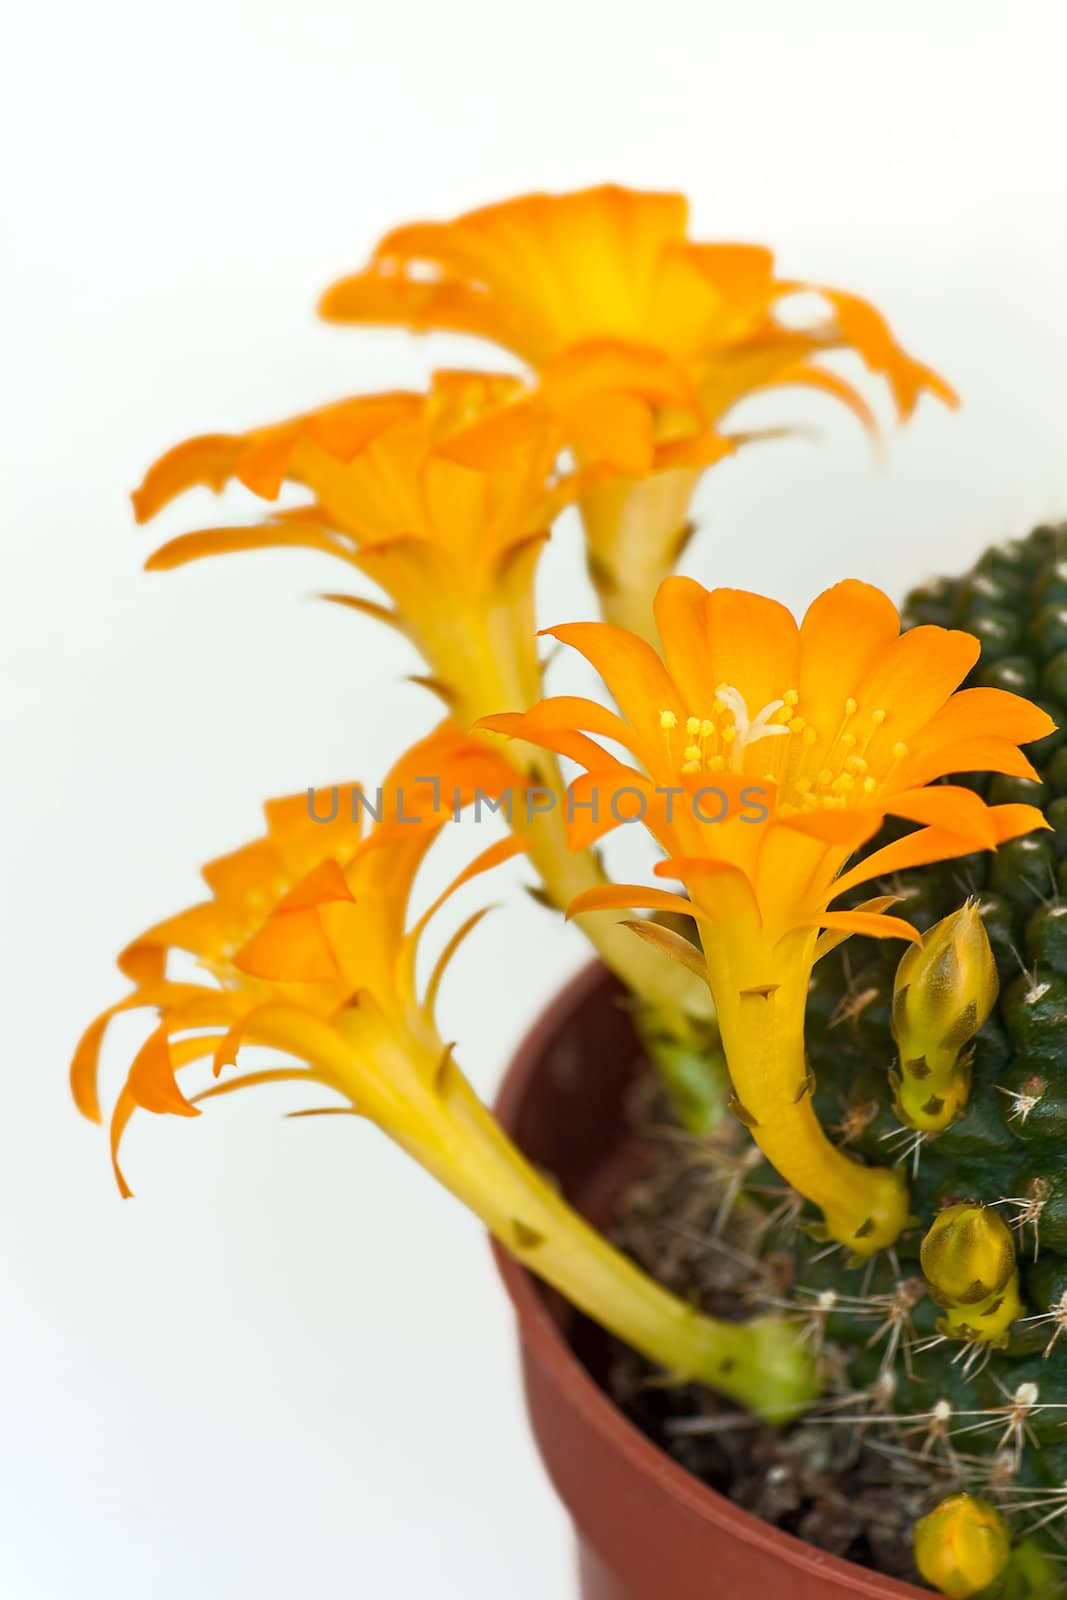 Cactus flowers  on light  background.Image with shallow depth of field.